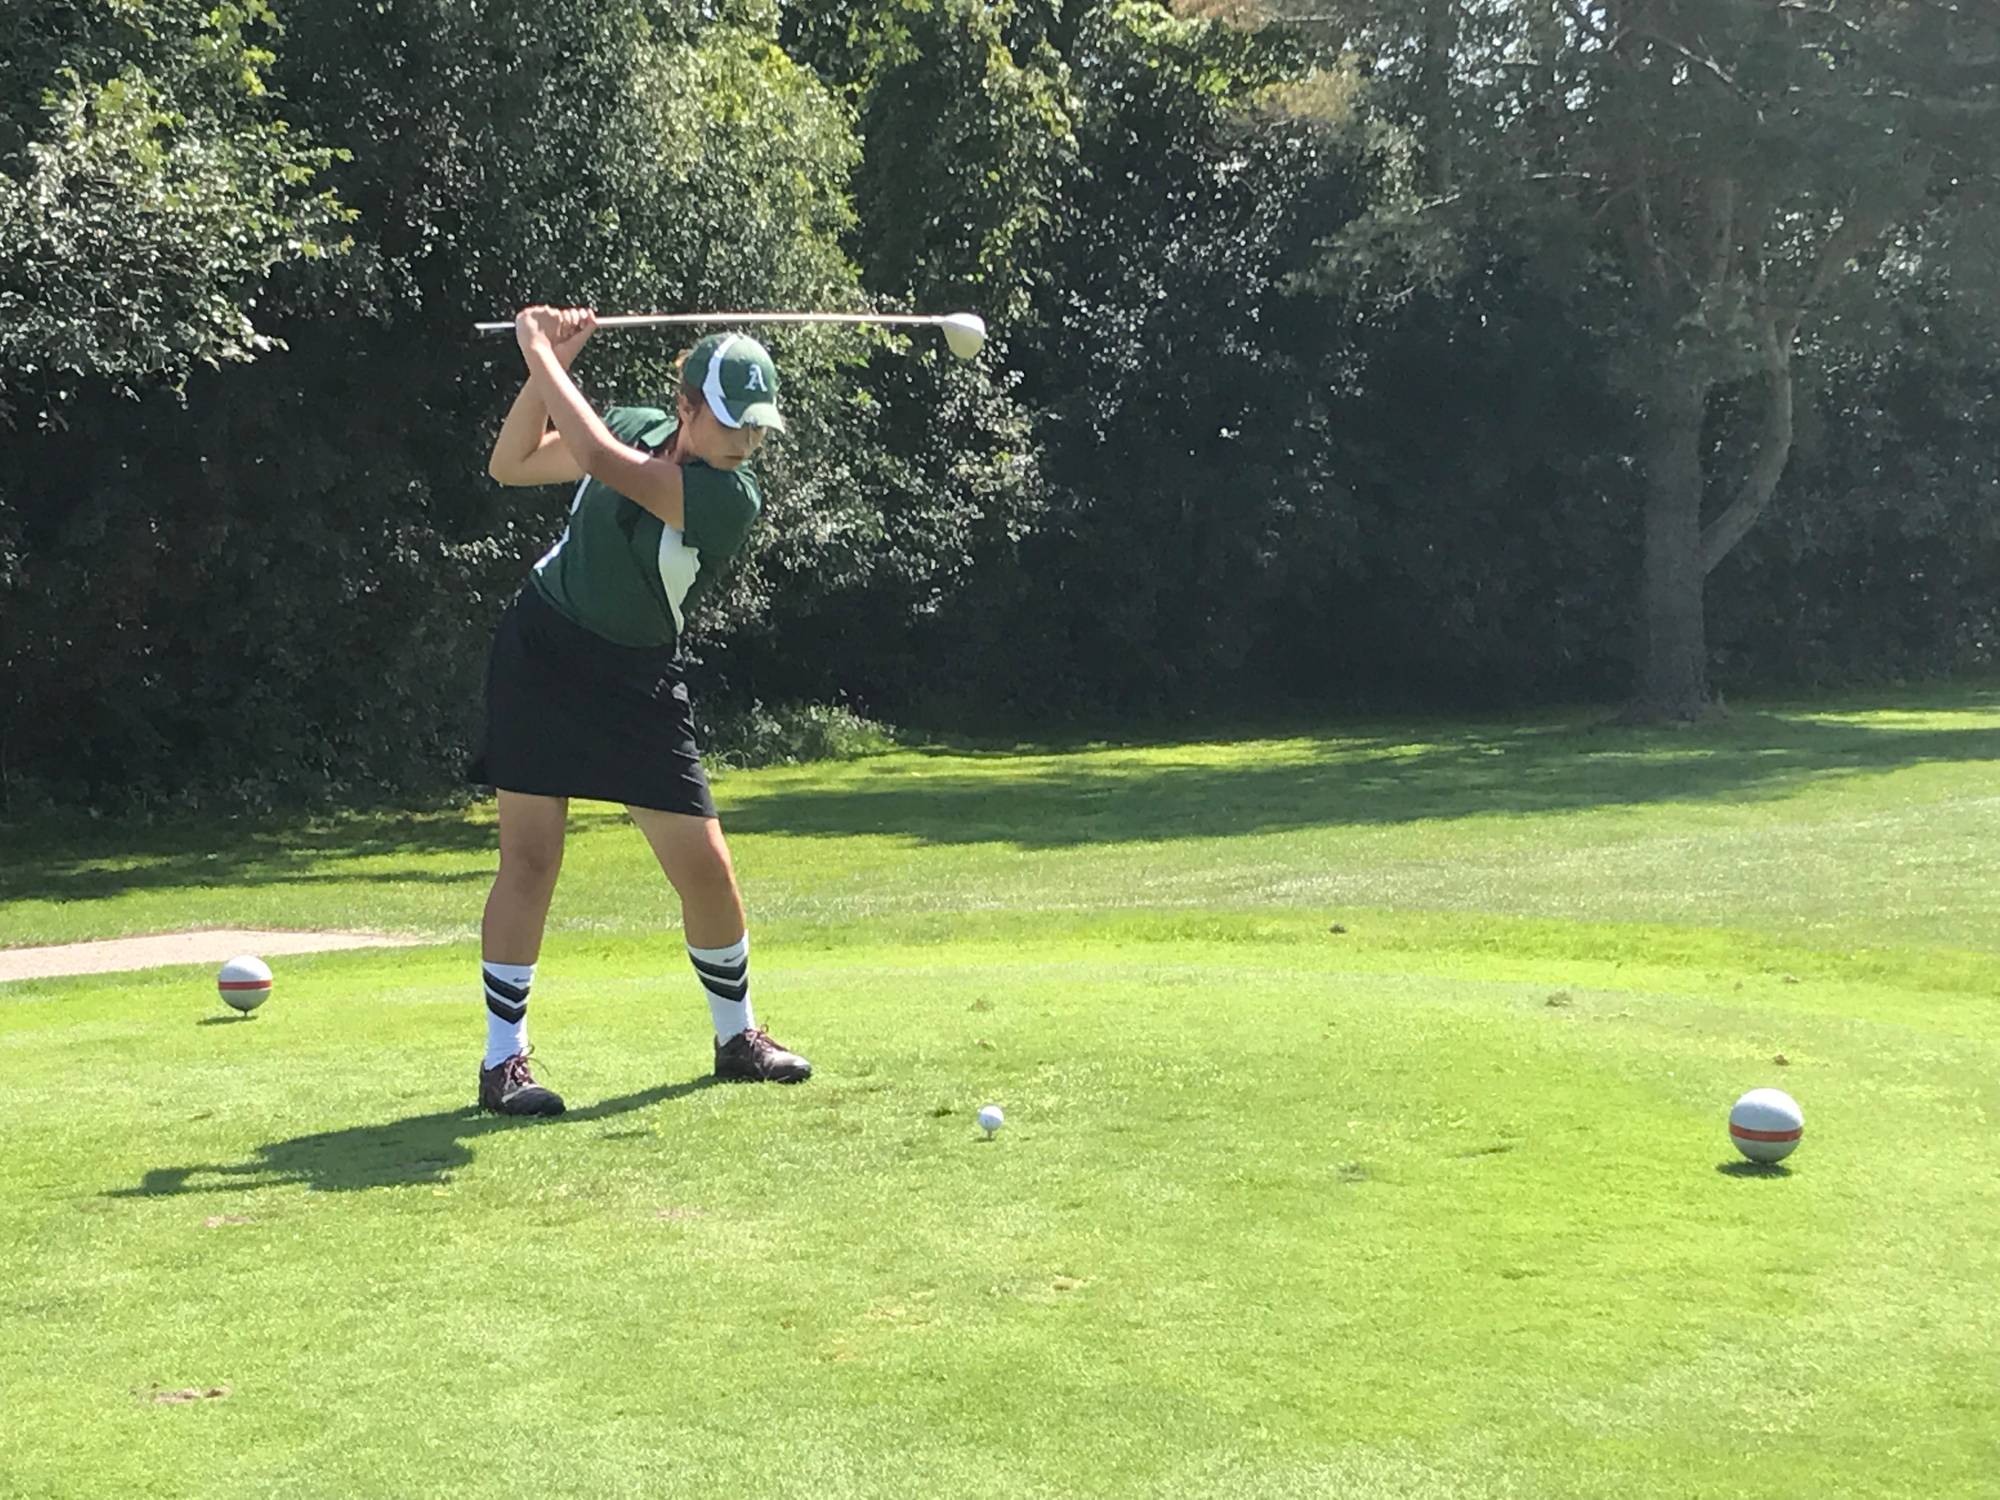 Kennedy fires it down the fairway!